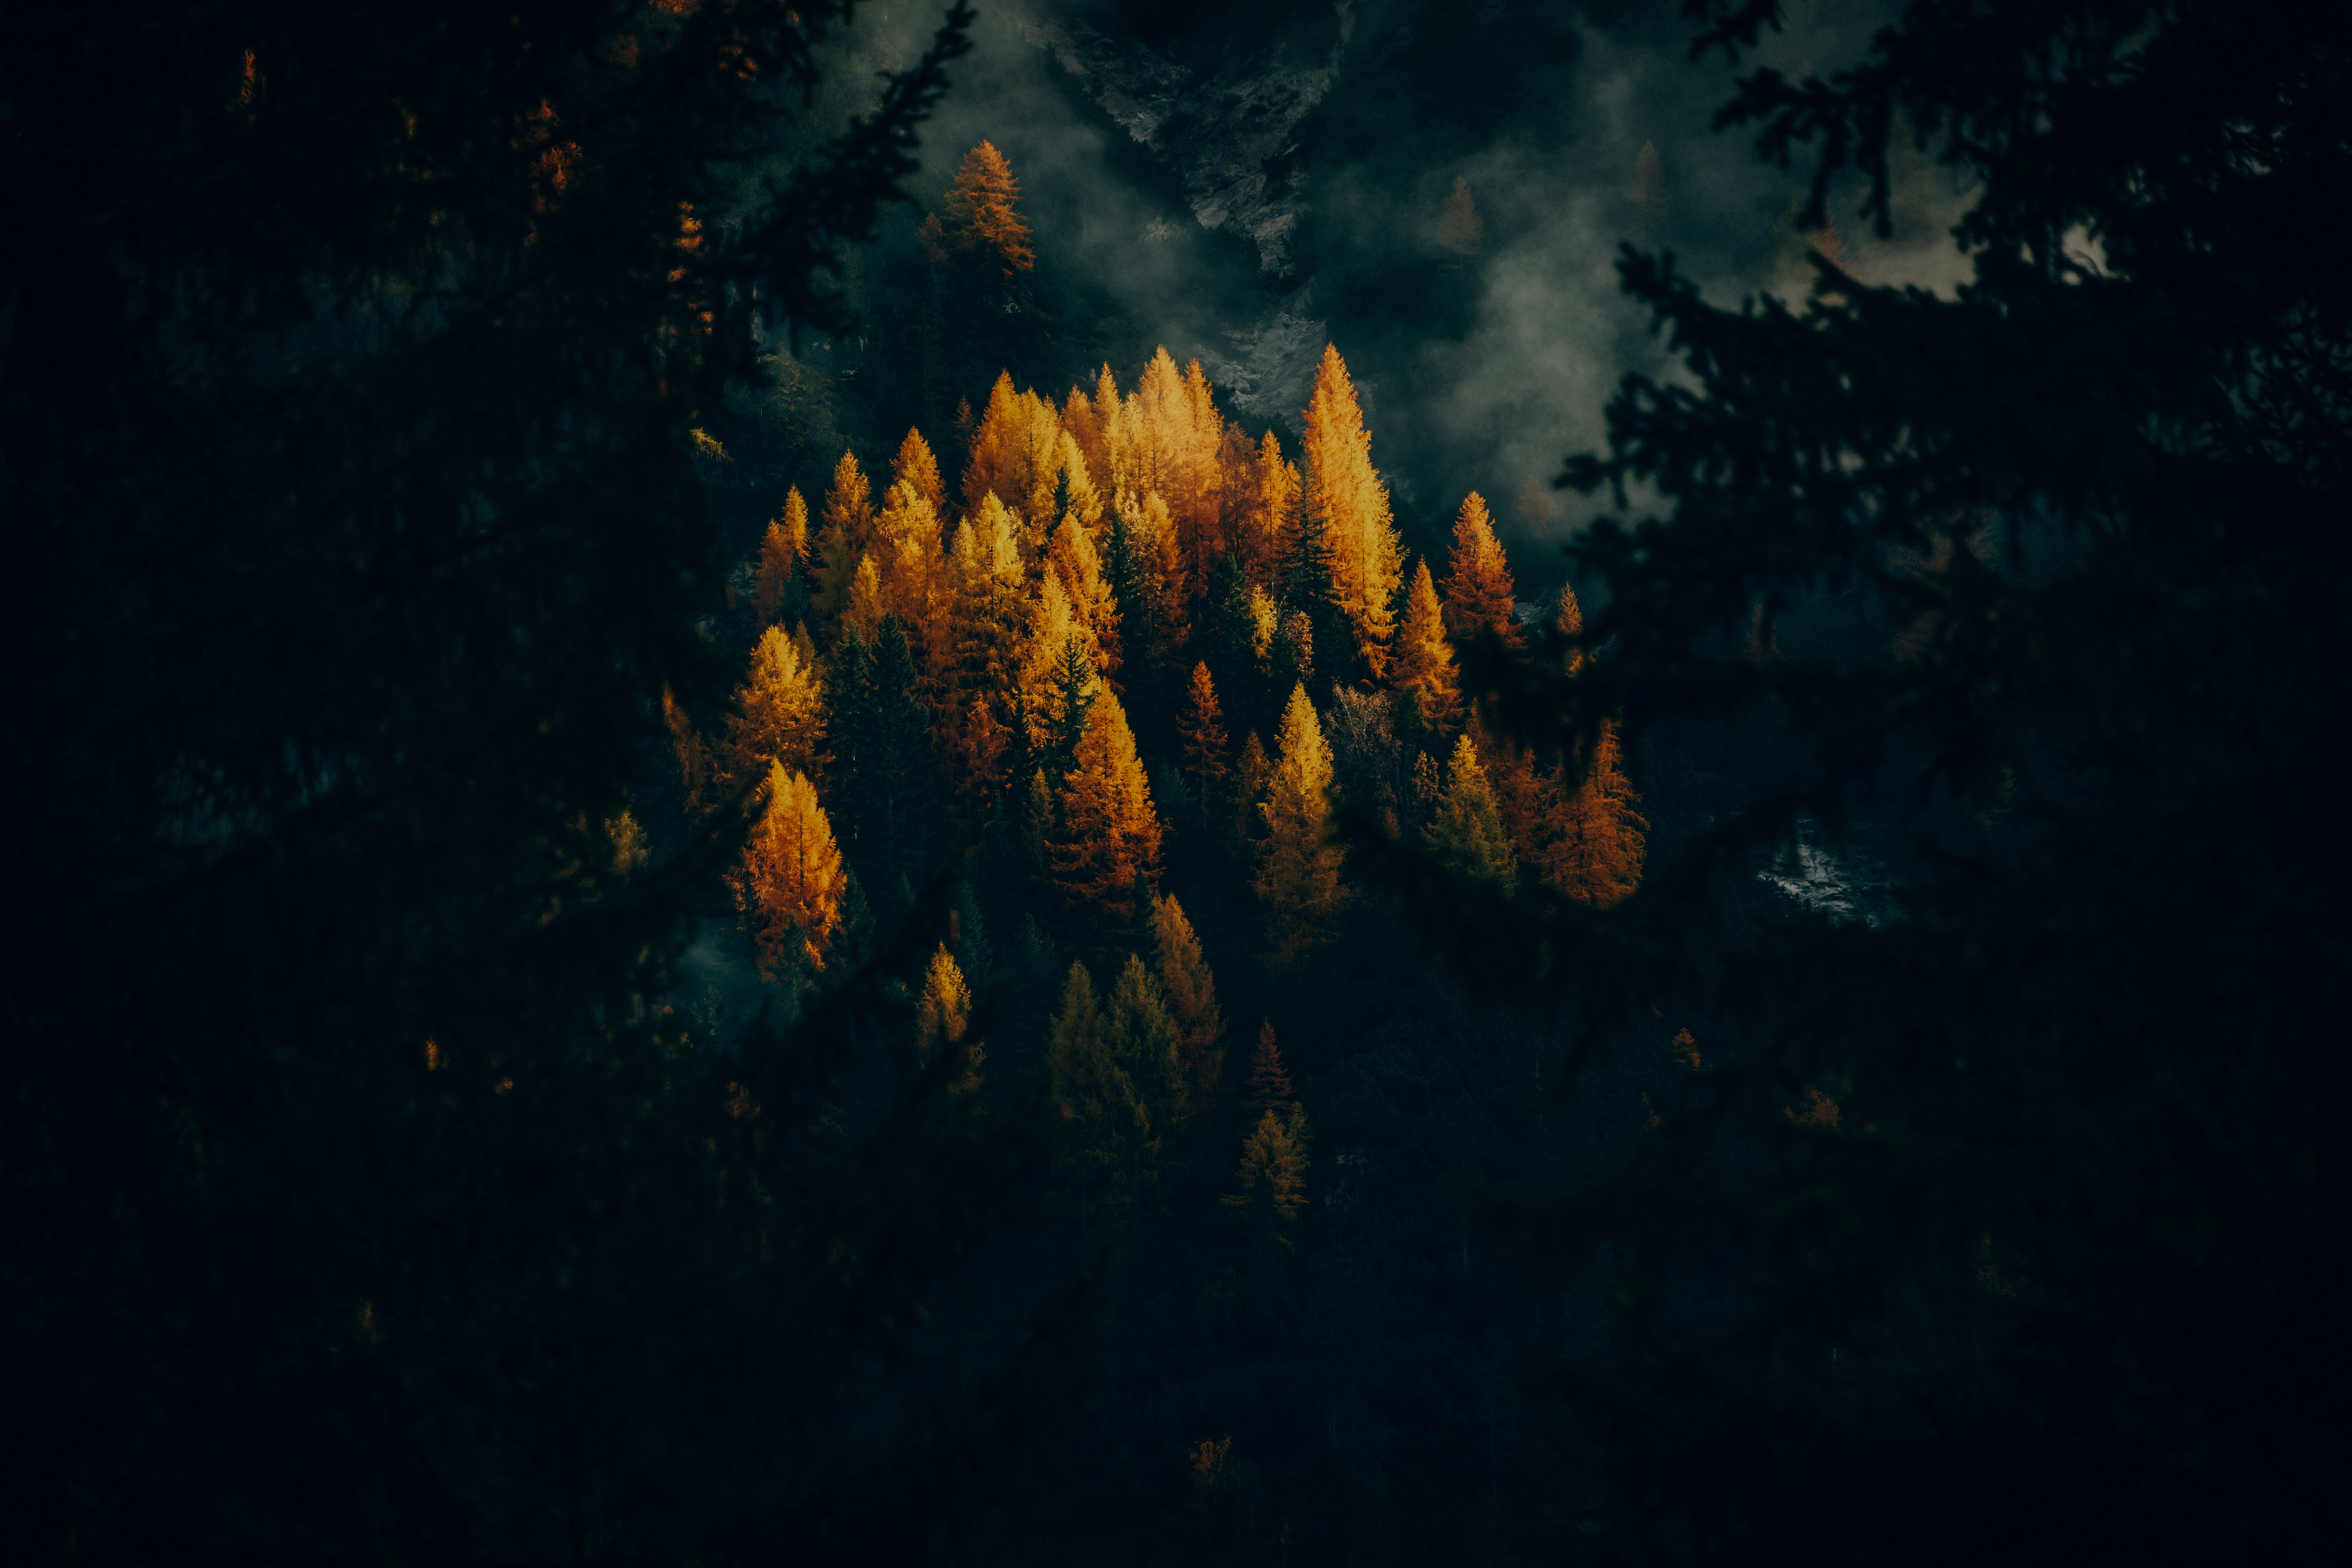 General 5760x3840 nature landscape trees forest low light dark fall mist high contrast Larch